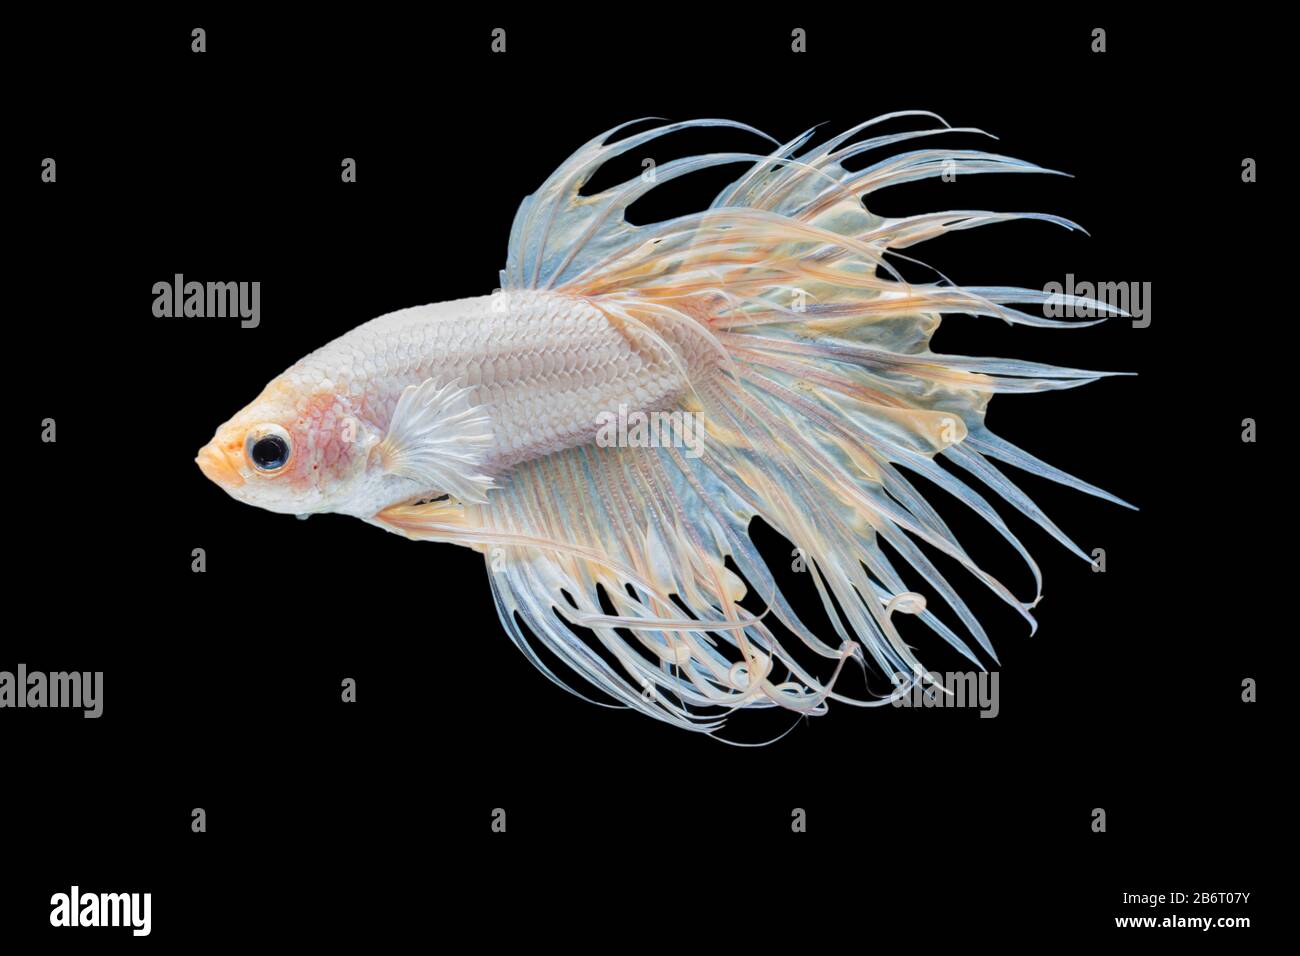 Beautiful white crowntail betta fish siamese fighting fish isolated on black background. fighting fish in movement on black background. Stock Photo